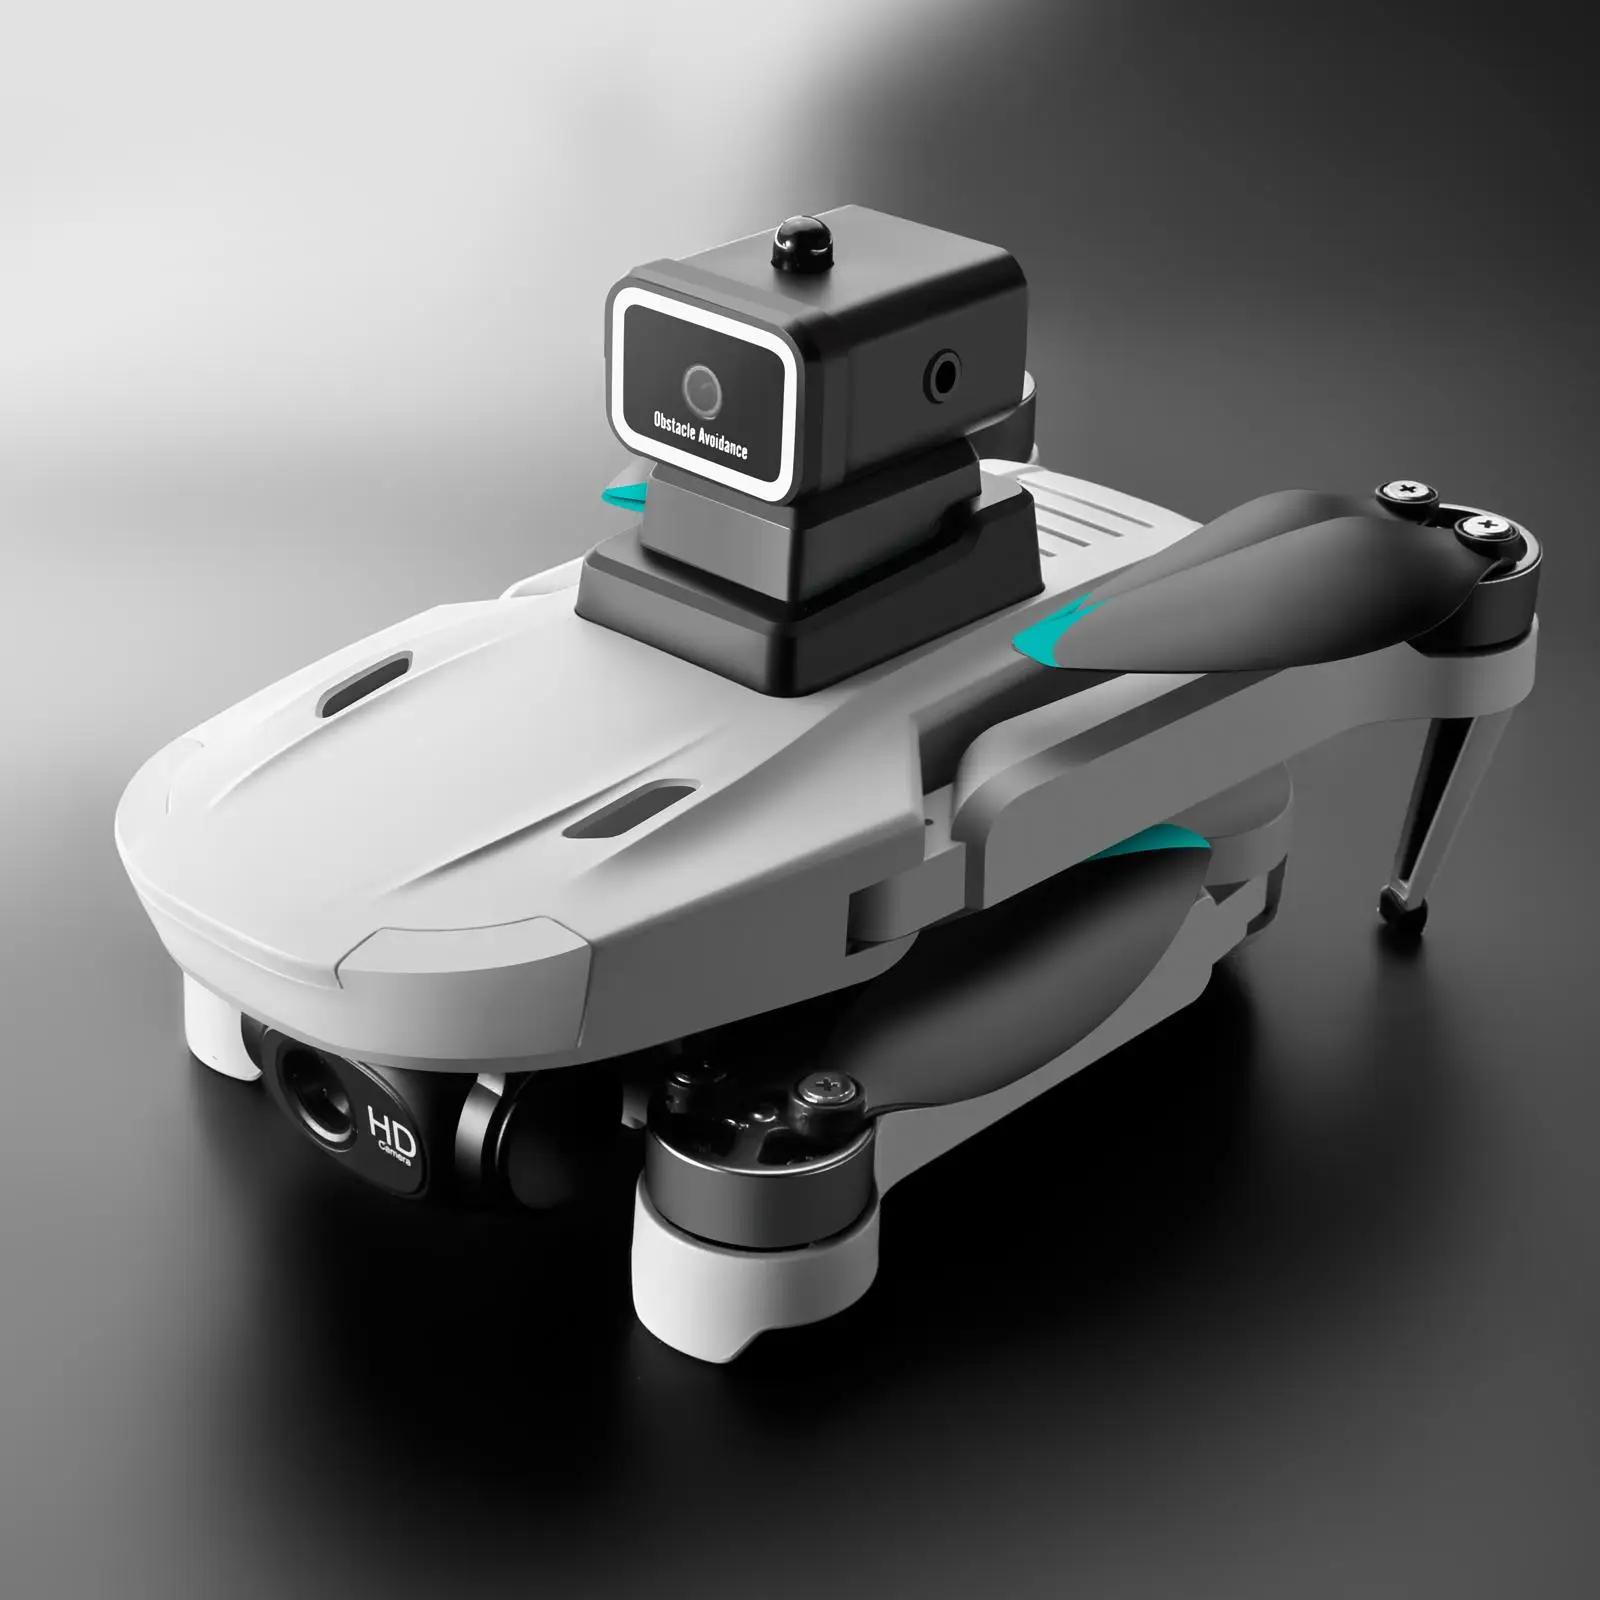 Mini Drones Photography Optical Flow Positioning for Game Mv Pictures